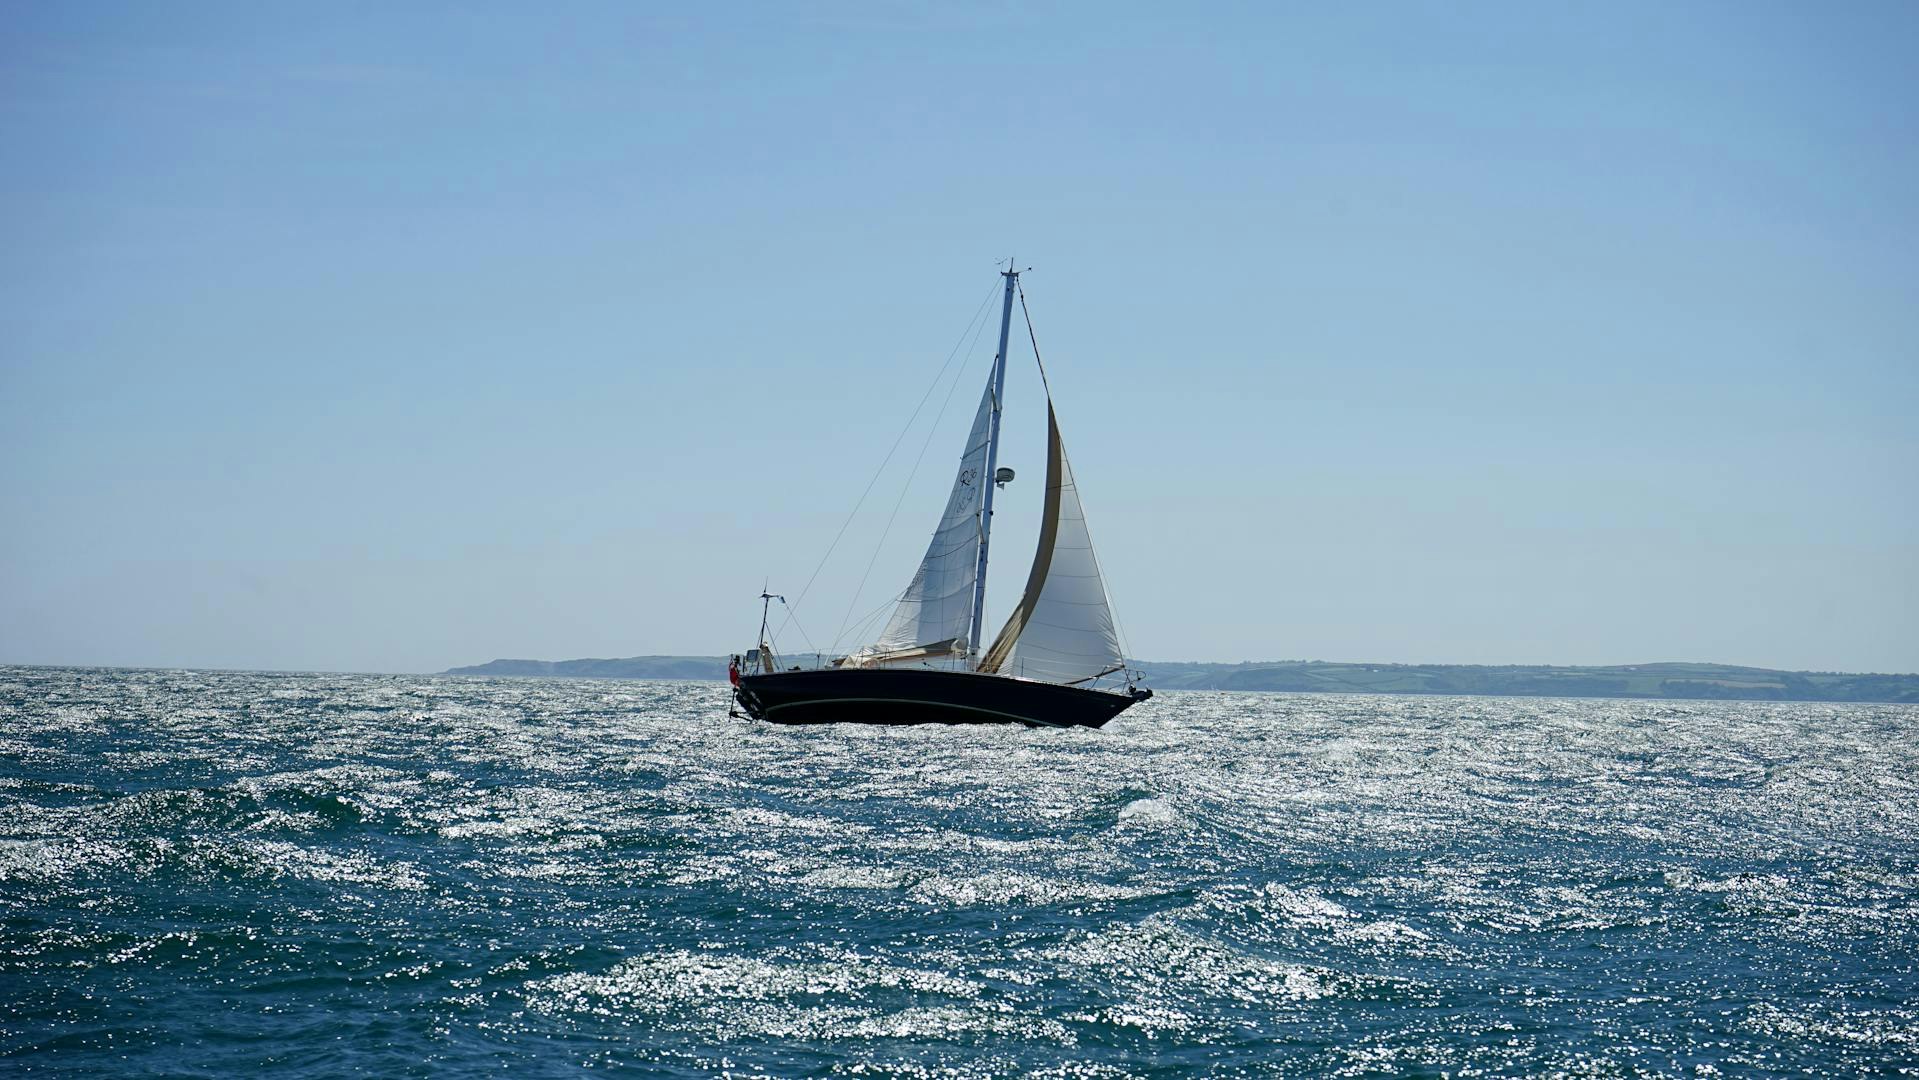 In crosswinds, proper sail setting is key. We'll show you how it's done.